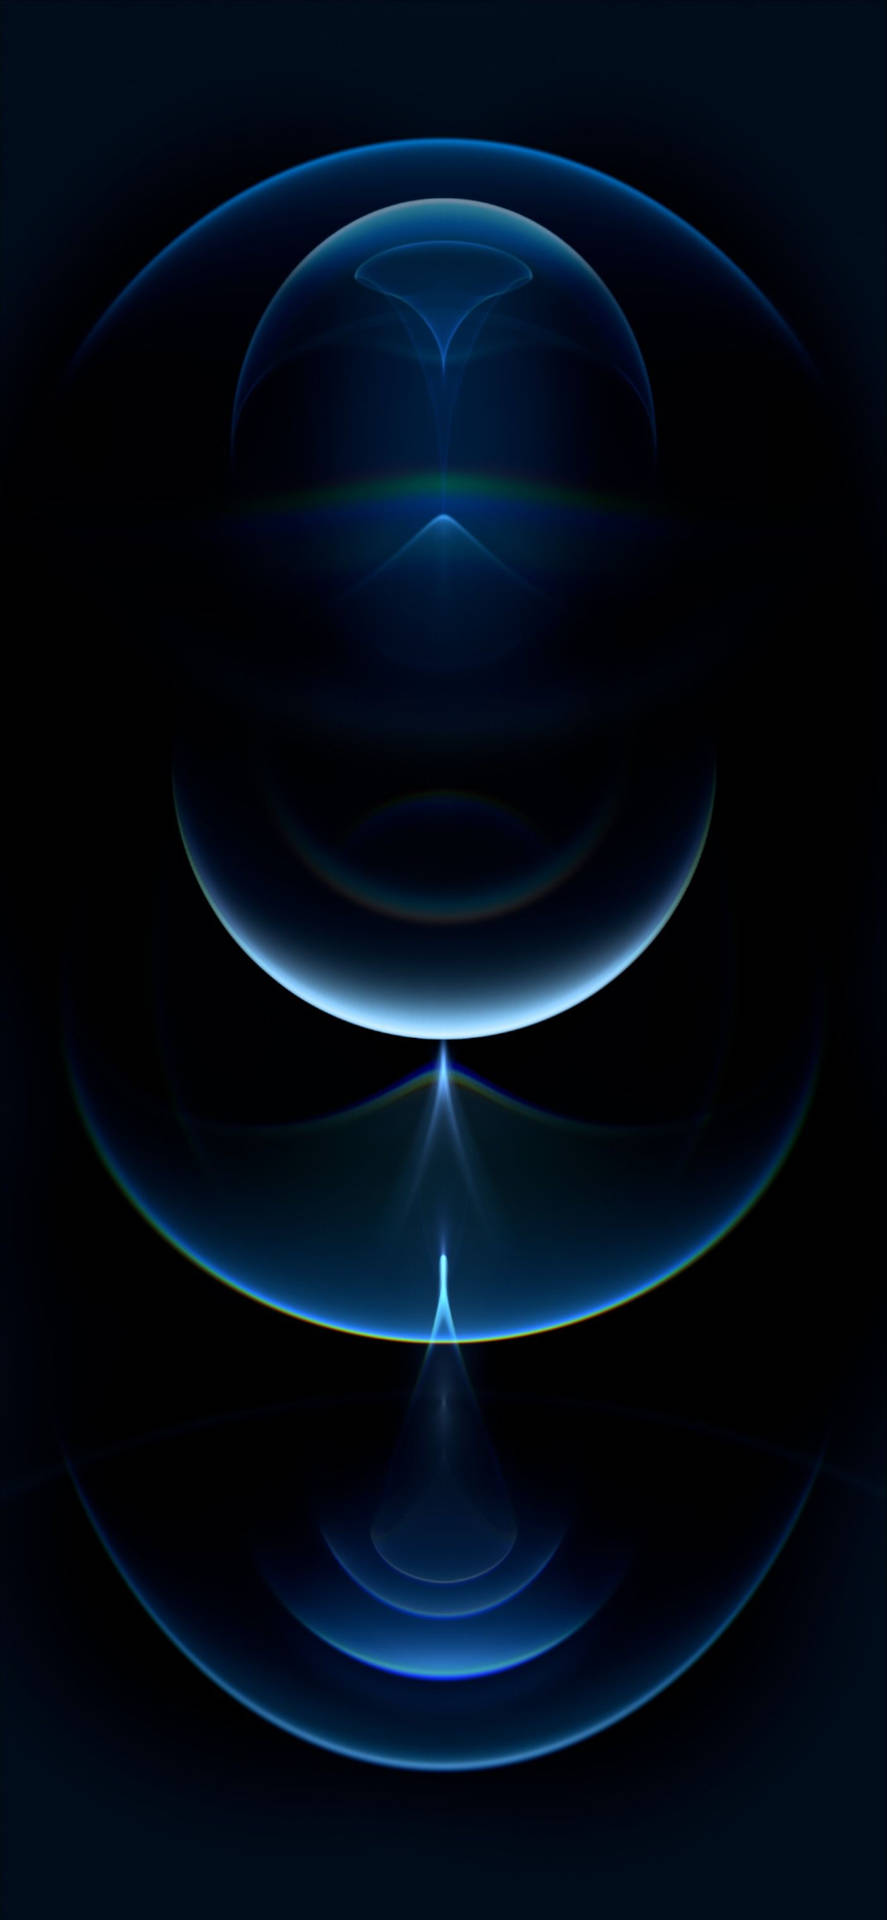 The Majestic, Default Blue Flares Of Ios 12 - Apple Iphone Background